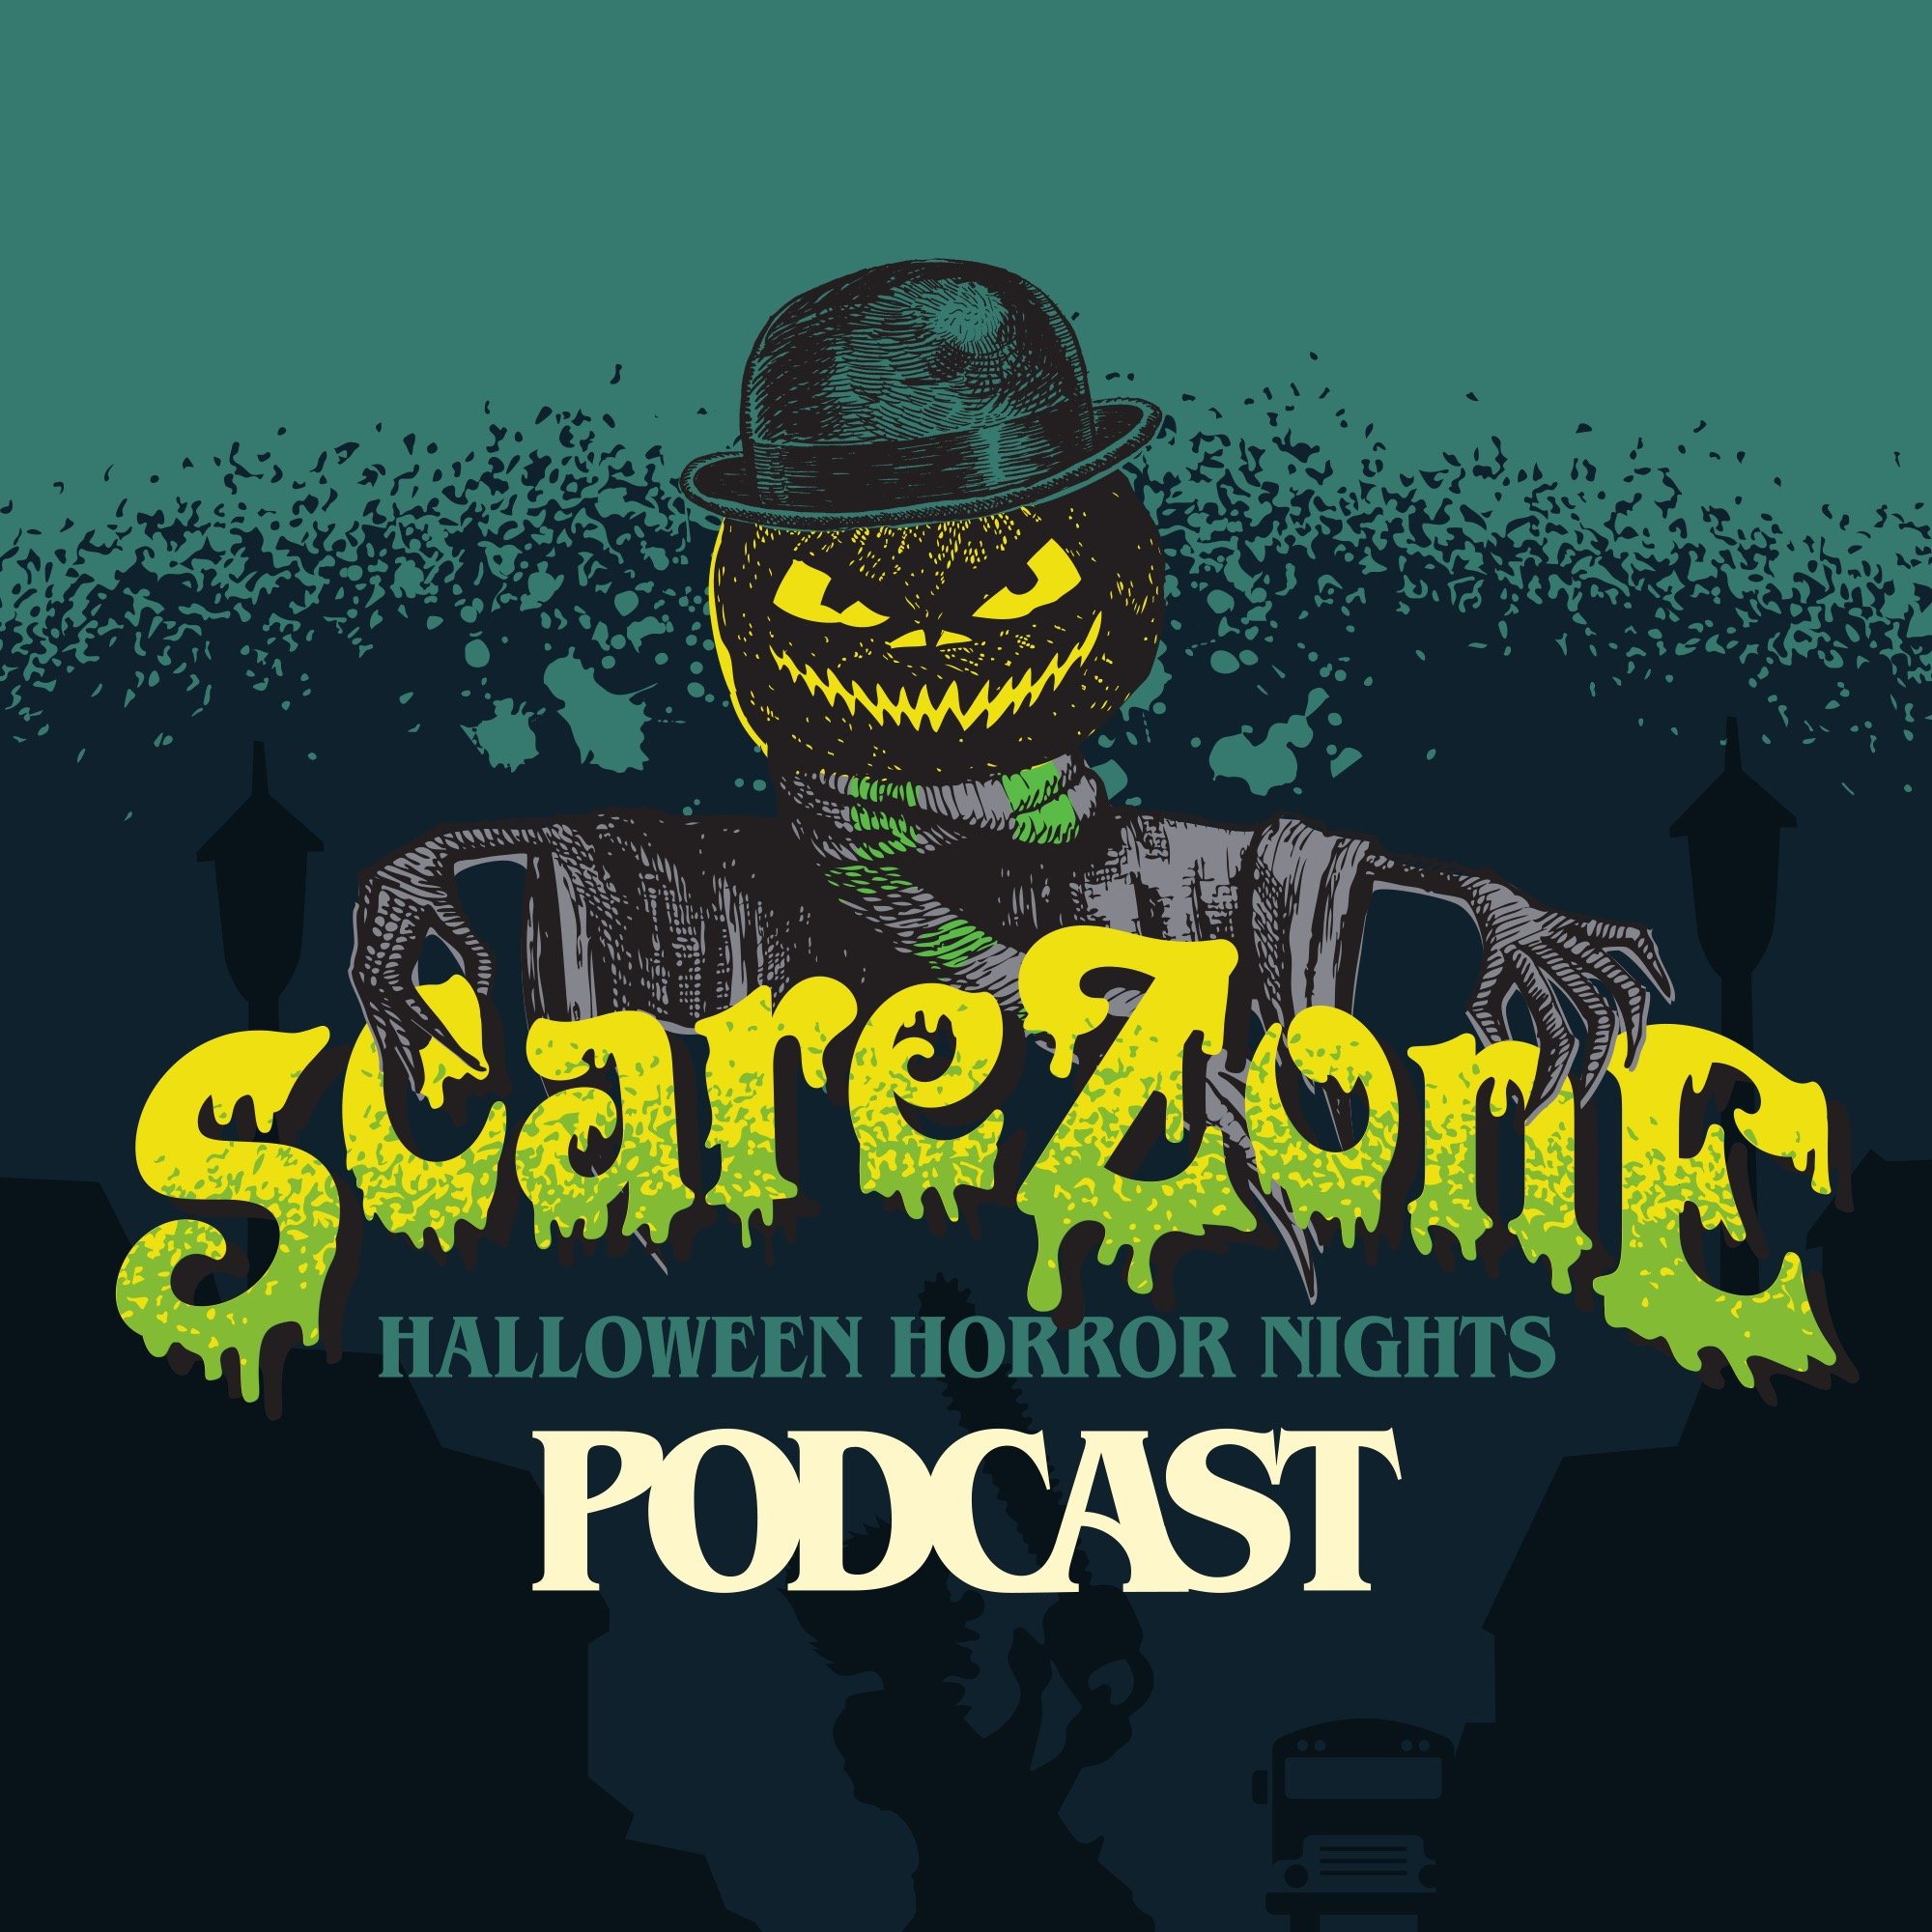 ScareZone is a Halloween Horror Nights Orlando fan, news, interview and commentary podcast. Evil Stepsister Show to @wdwtodaypodcast.